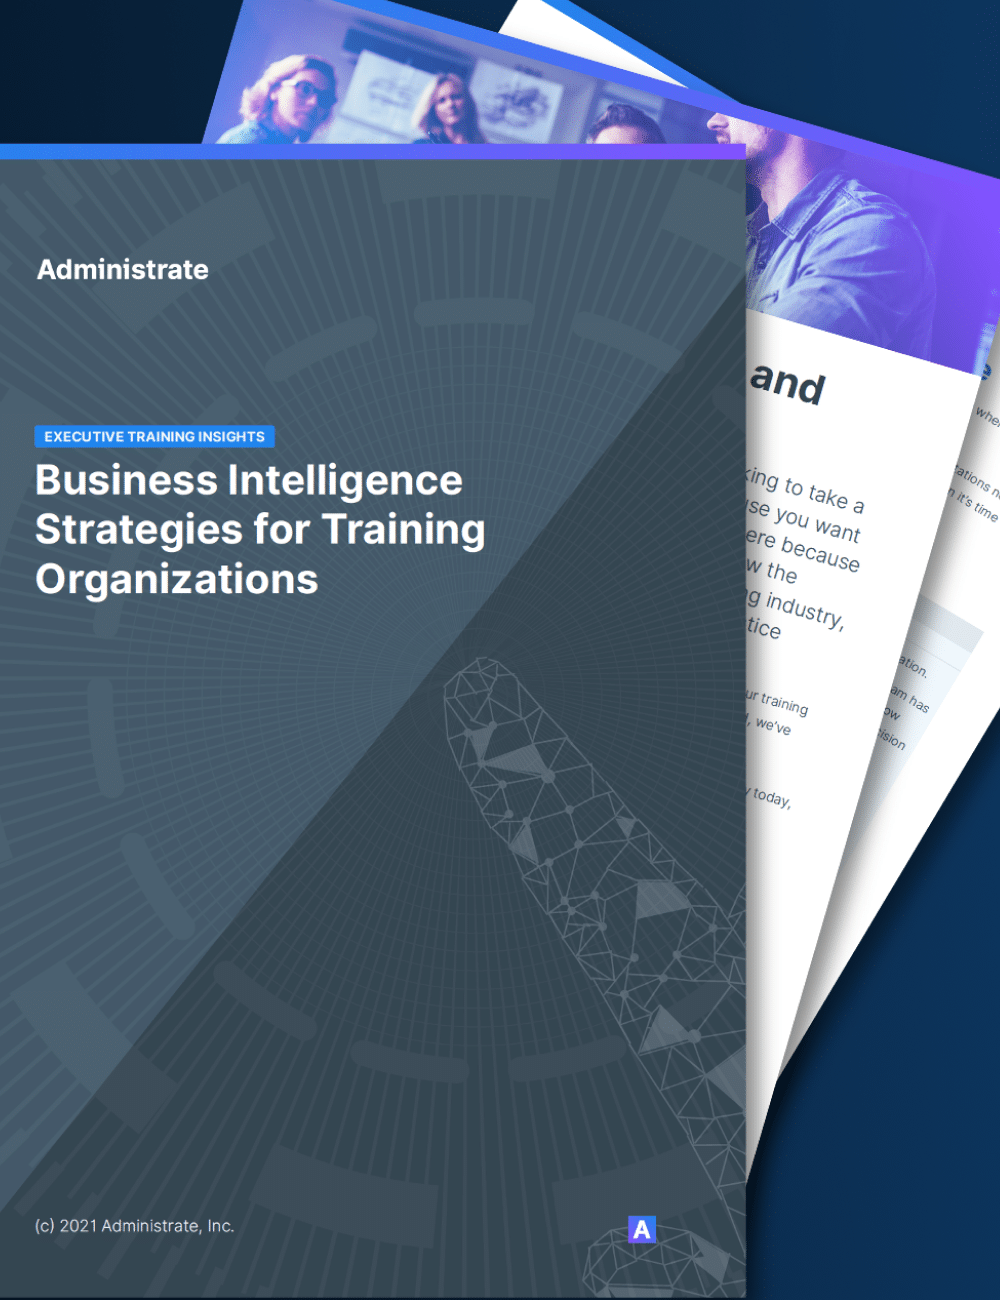 Administrate Ebook: Business intelligence strategies for training organizations